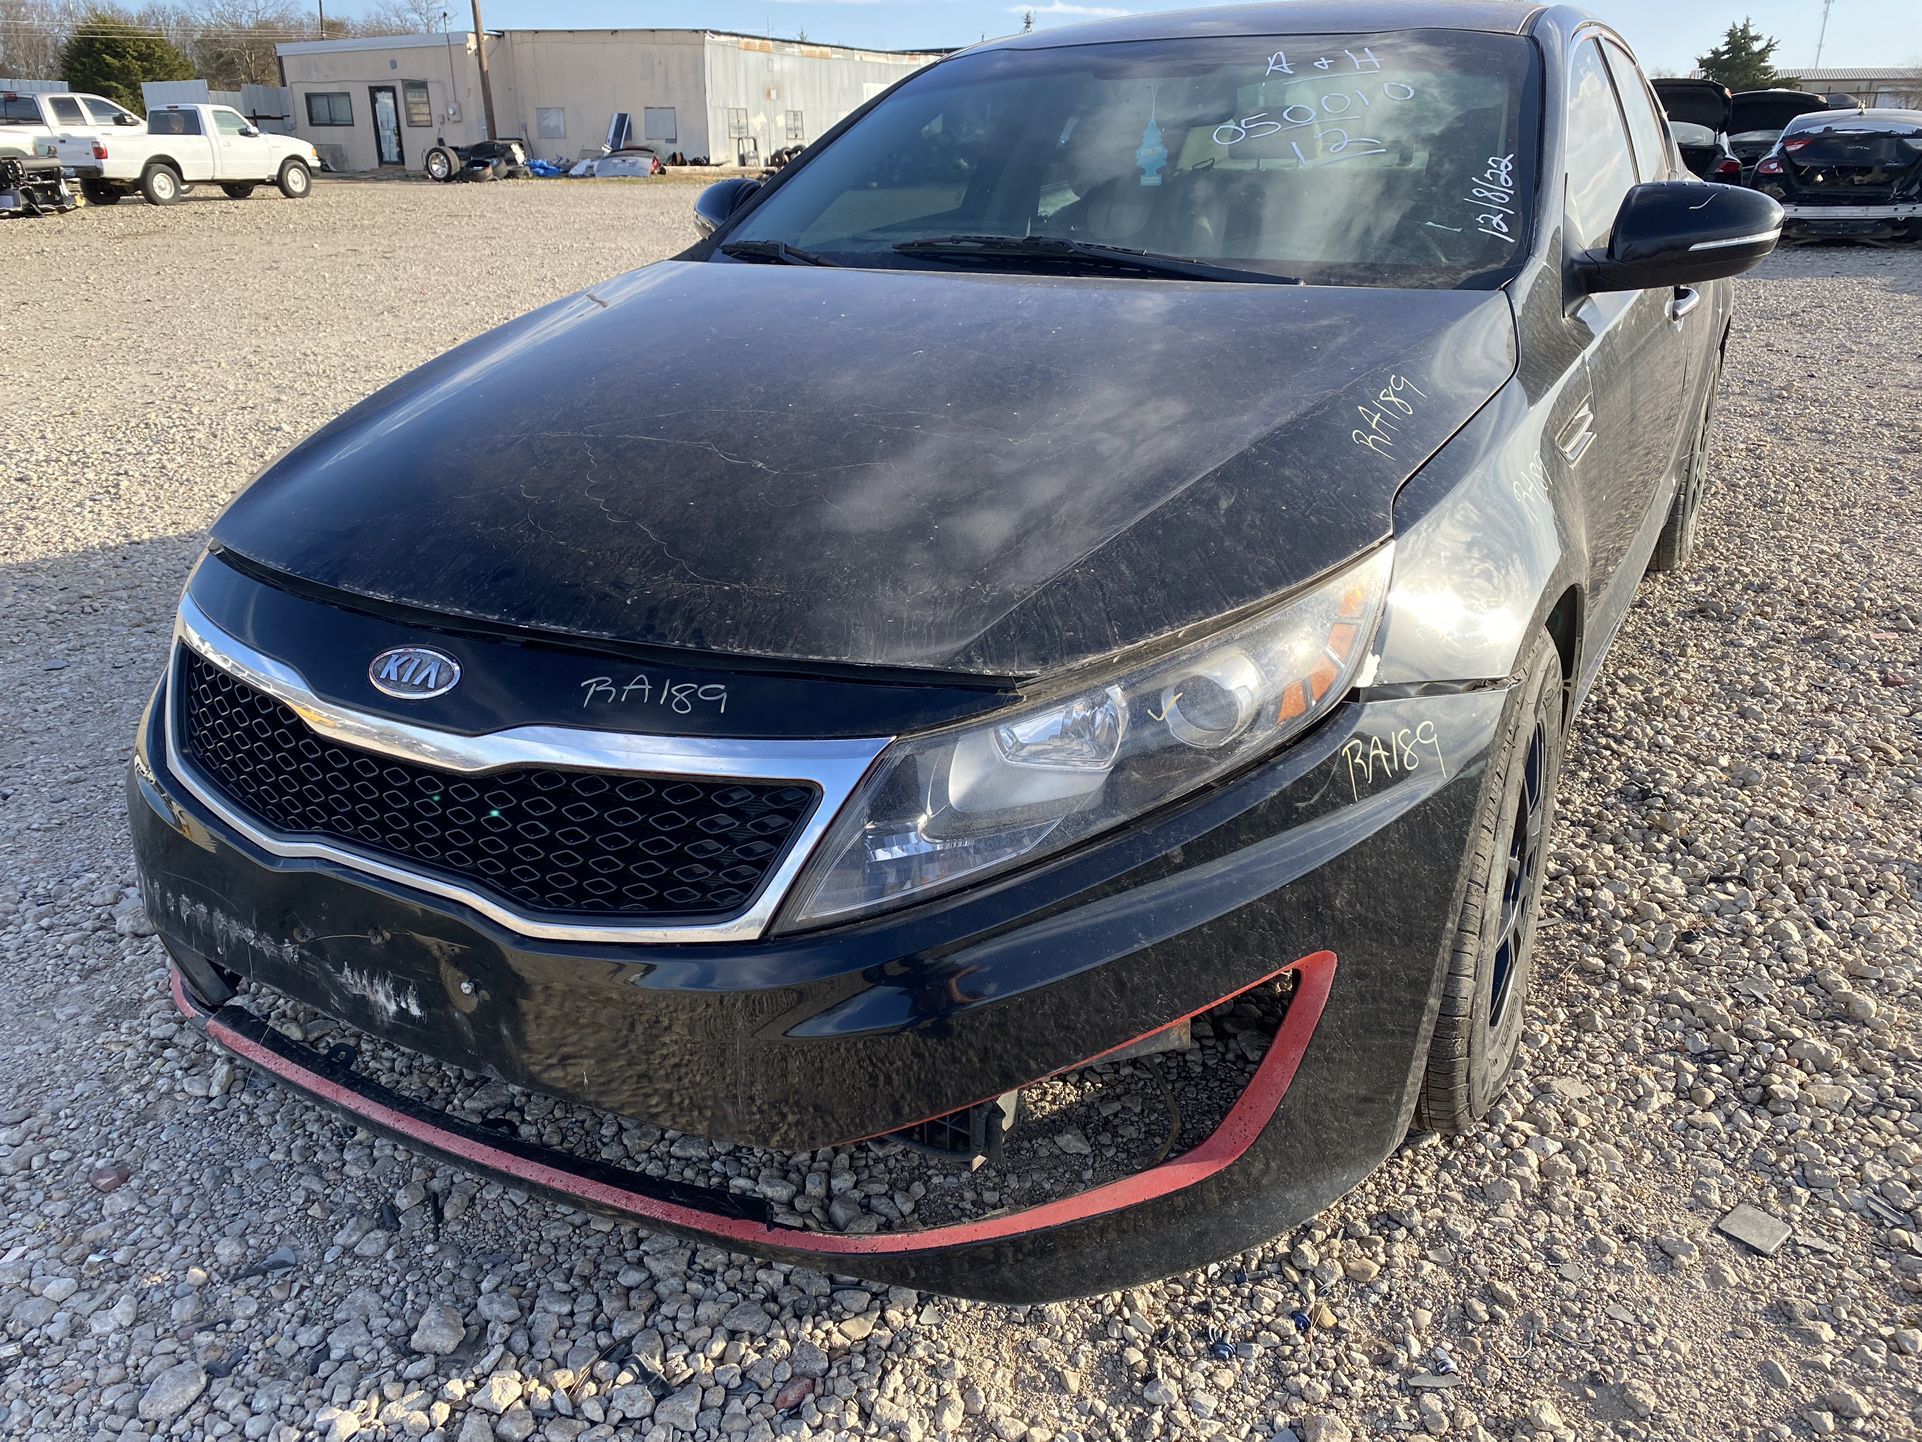 For PARTS ONLY 2012 Kia OPTIMA LX 2.4L FWD bad engine / for parts 11-2016